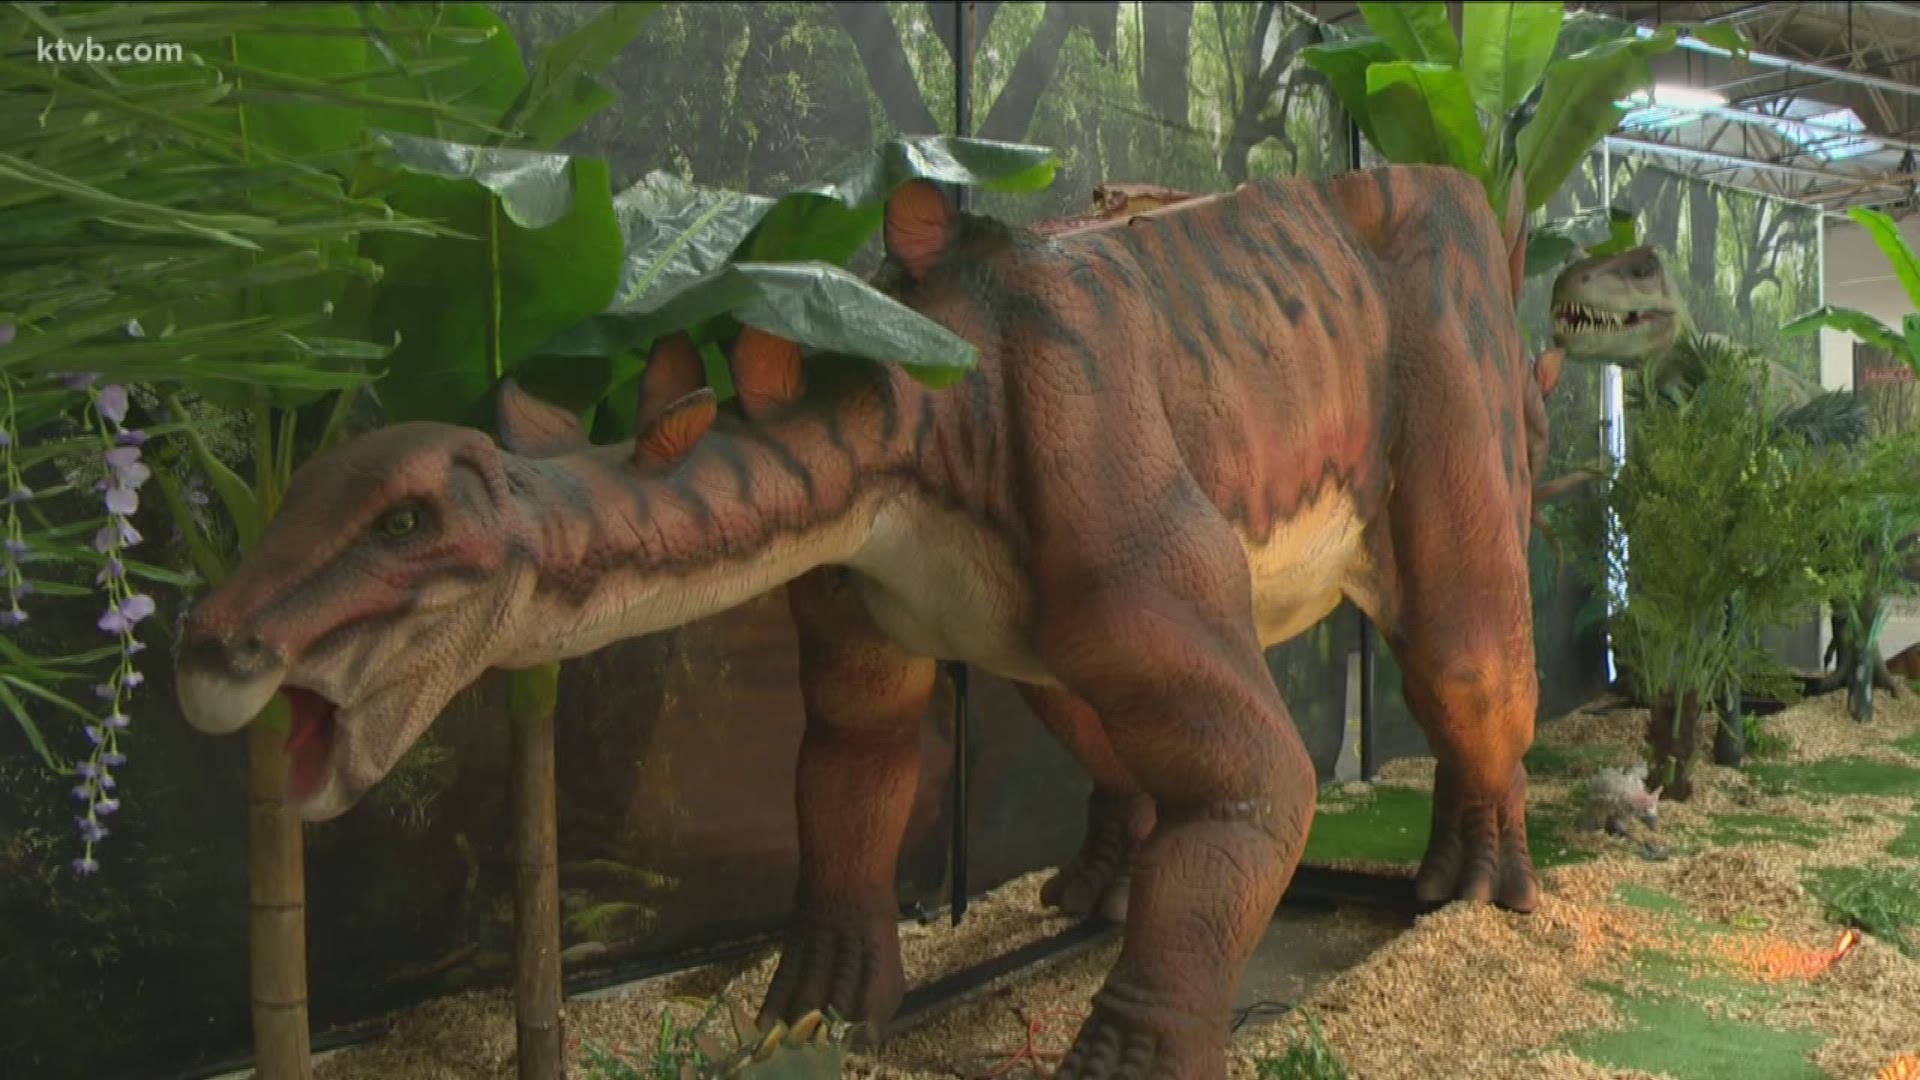 The nation's largest and most realistic dinosaurs will be in Boise Friday through Sunday.